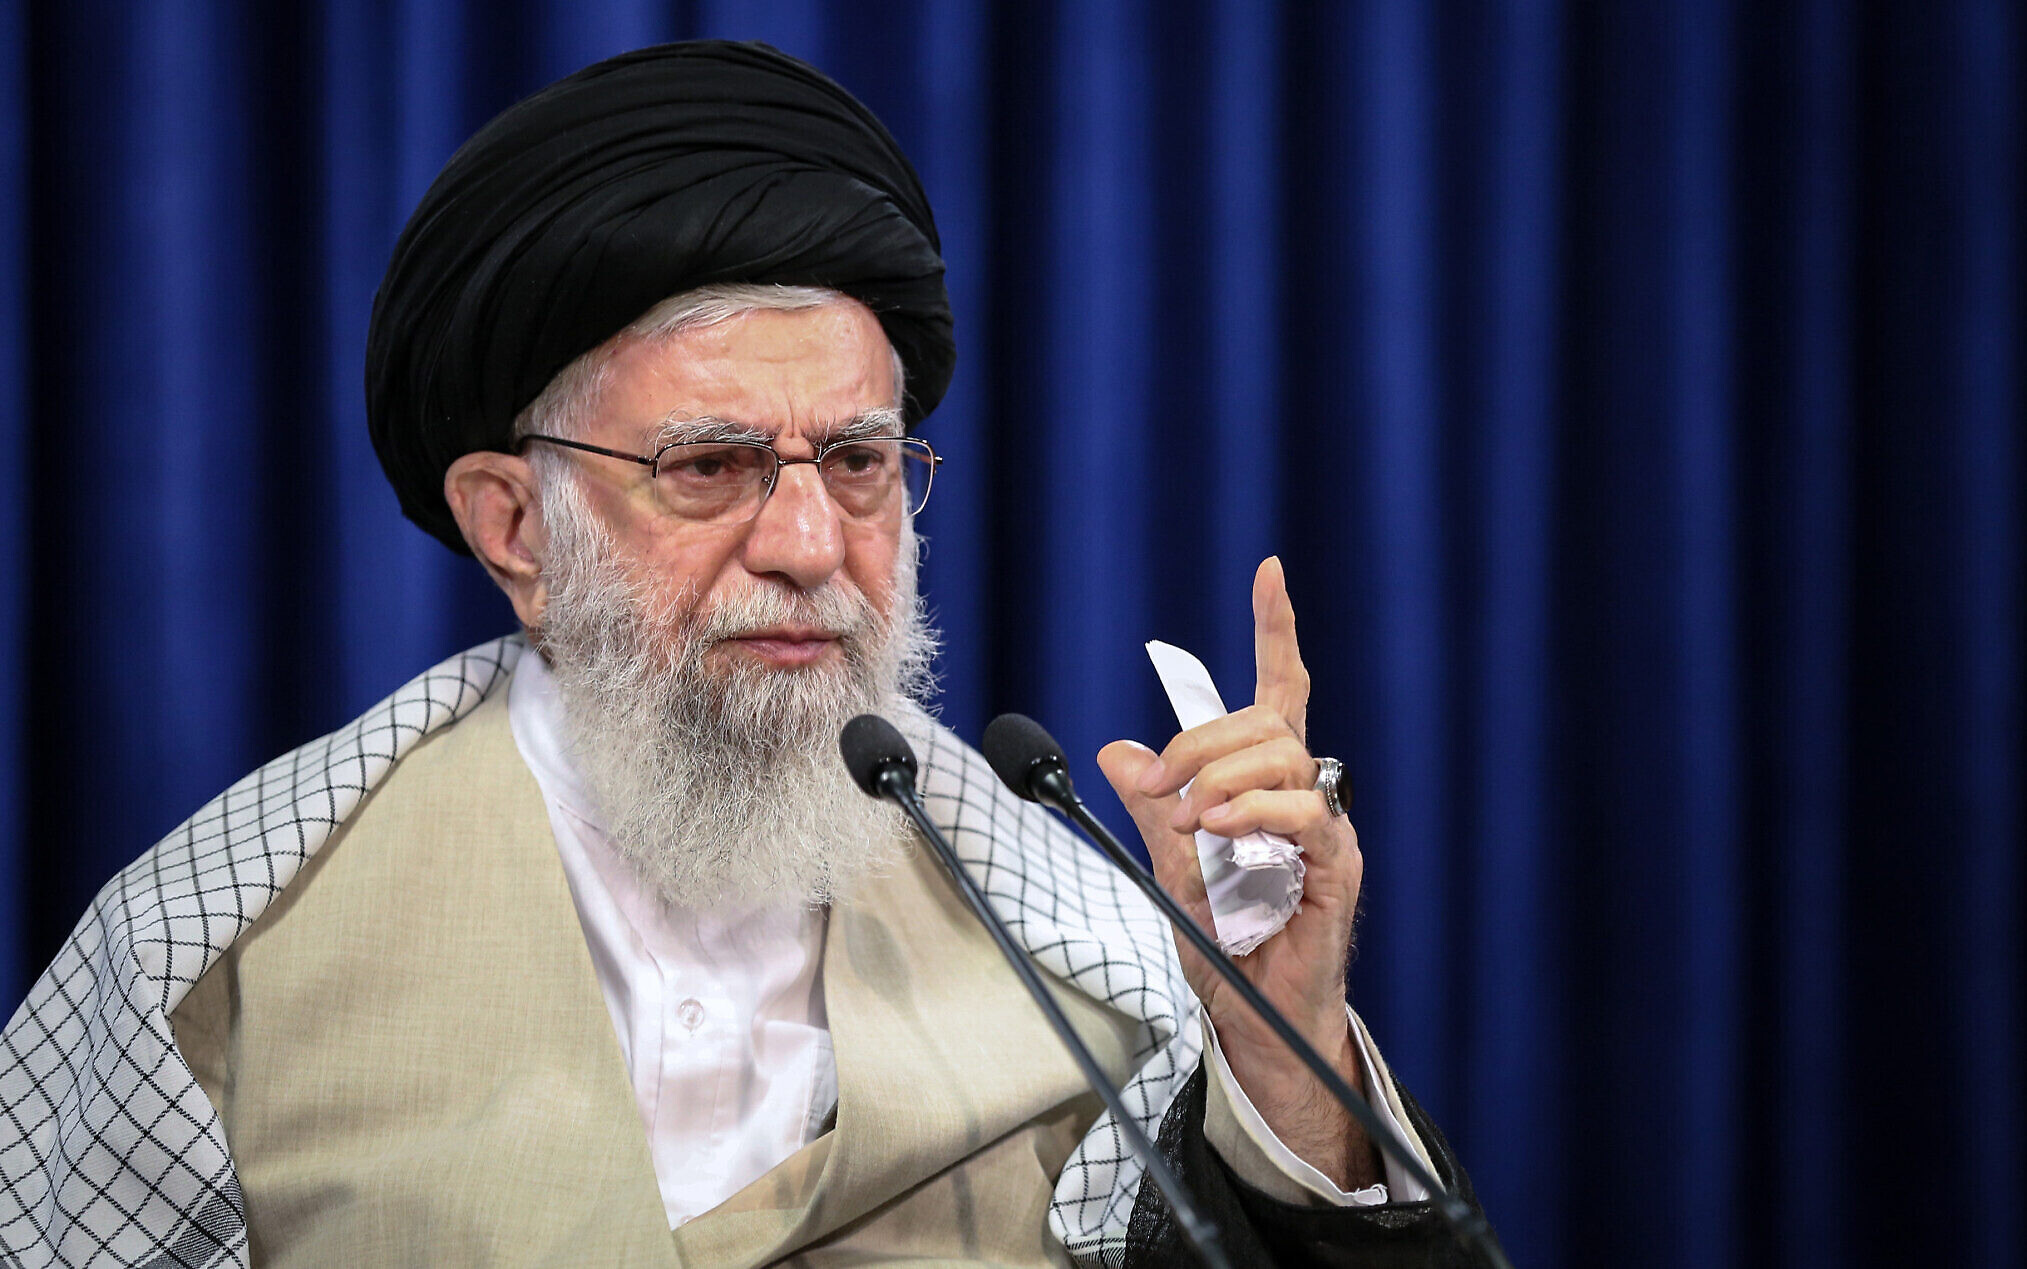 We can't trust foreigners': Khamenei warns against hopes of 'opening' with West | The Times of Israel